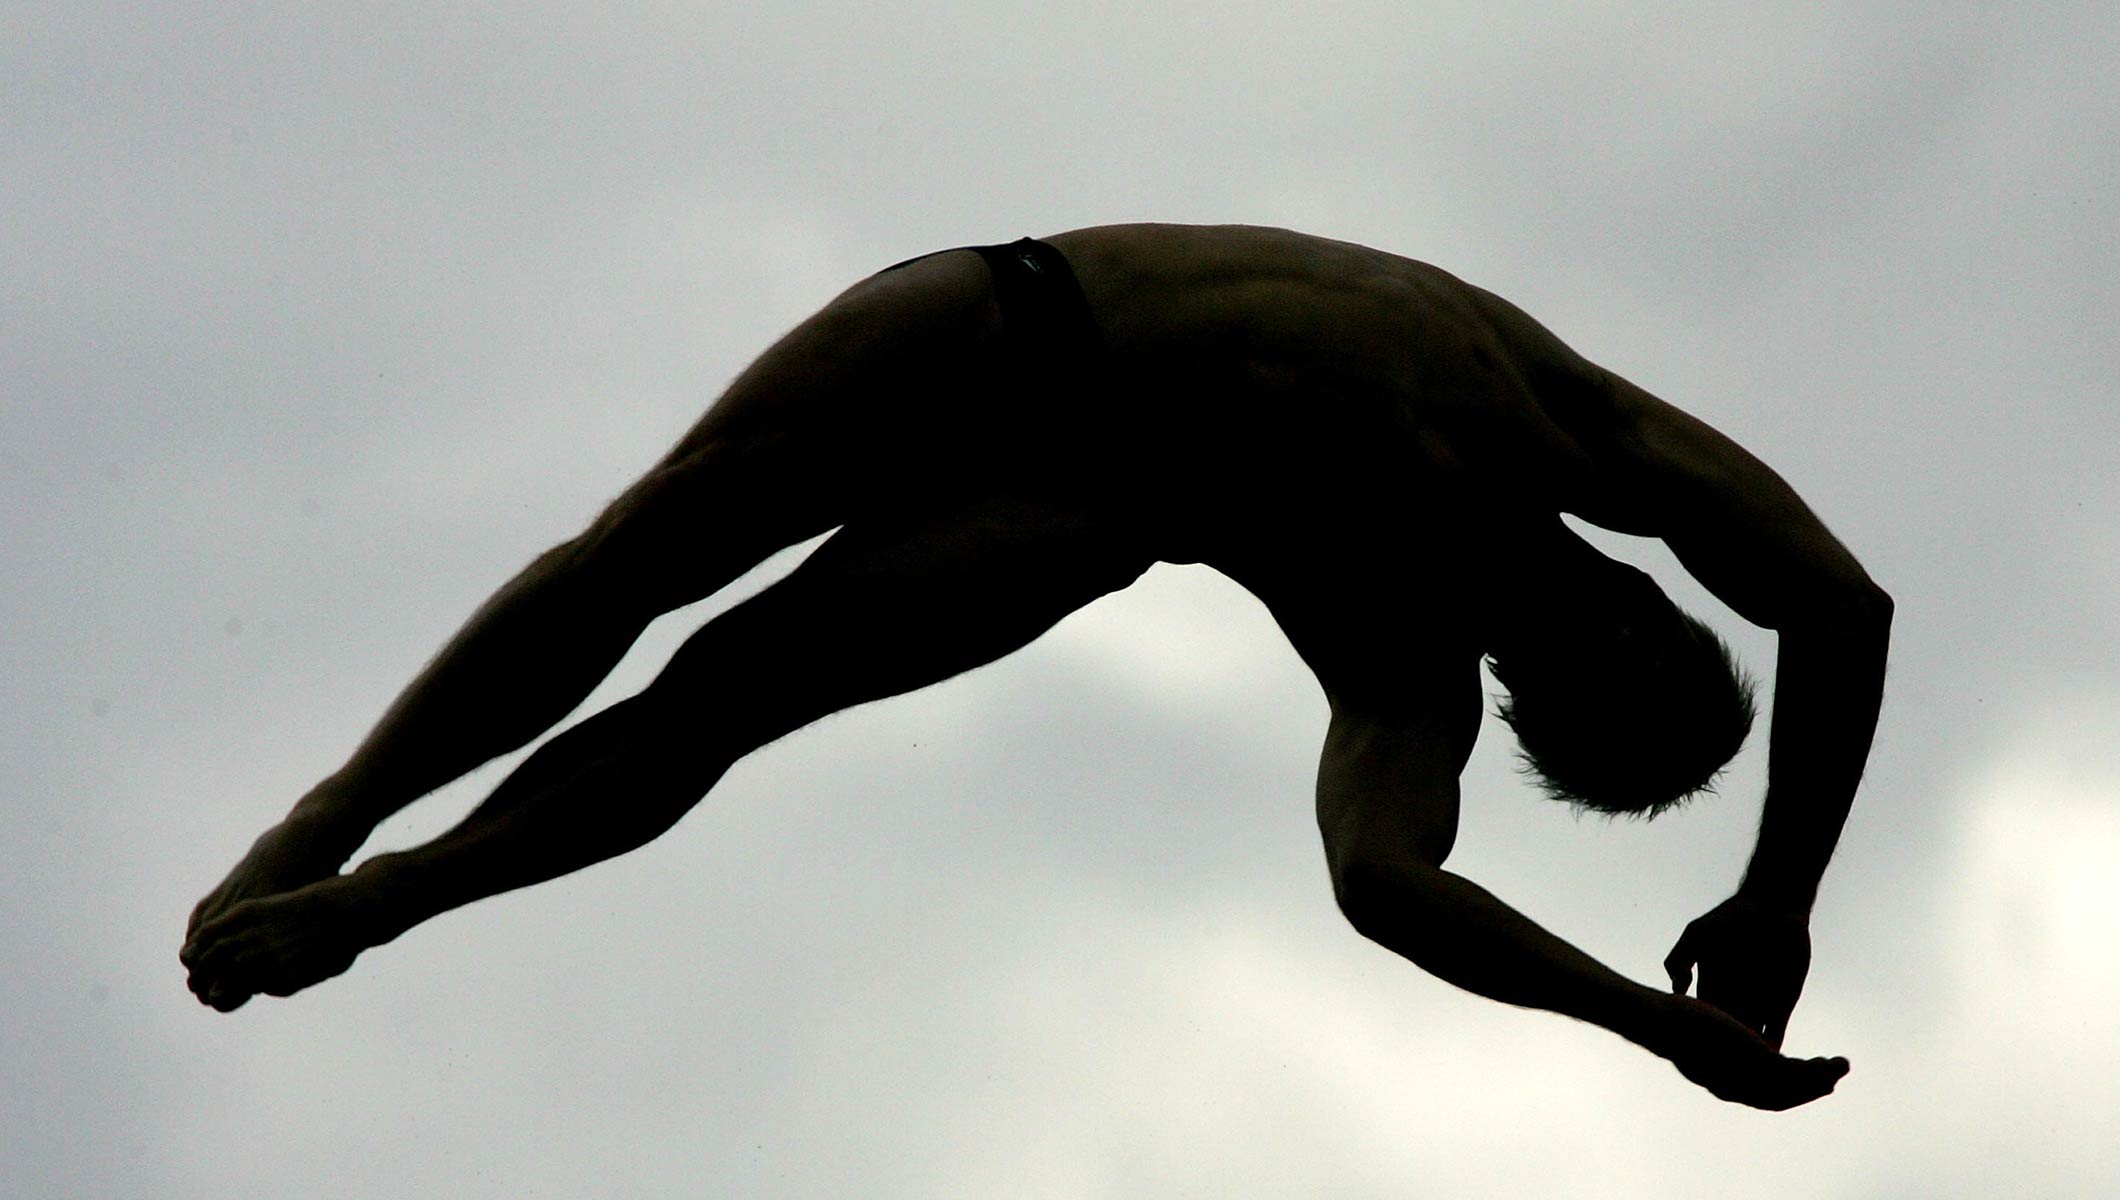 olympic diving silhouette